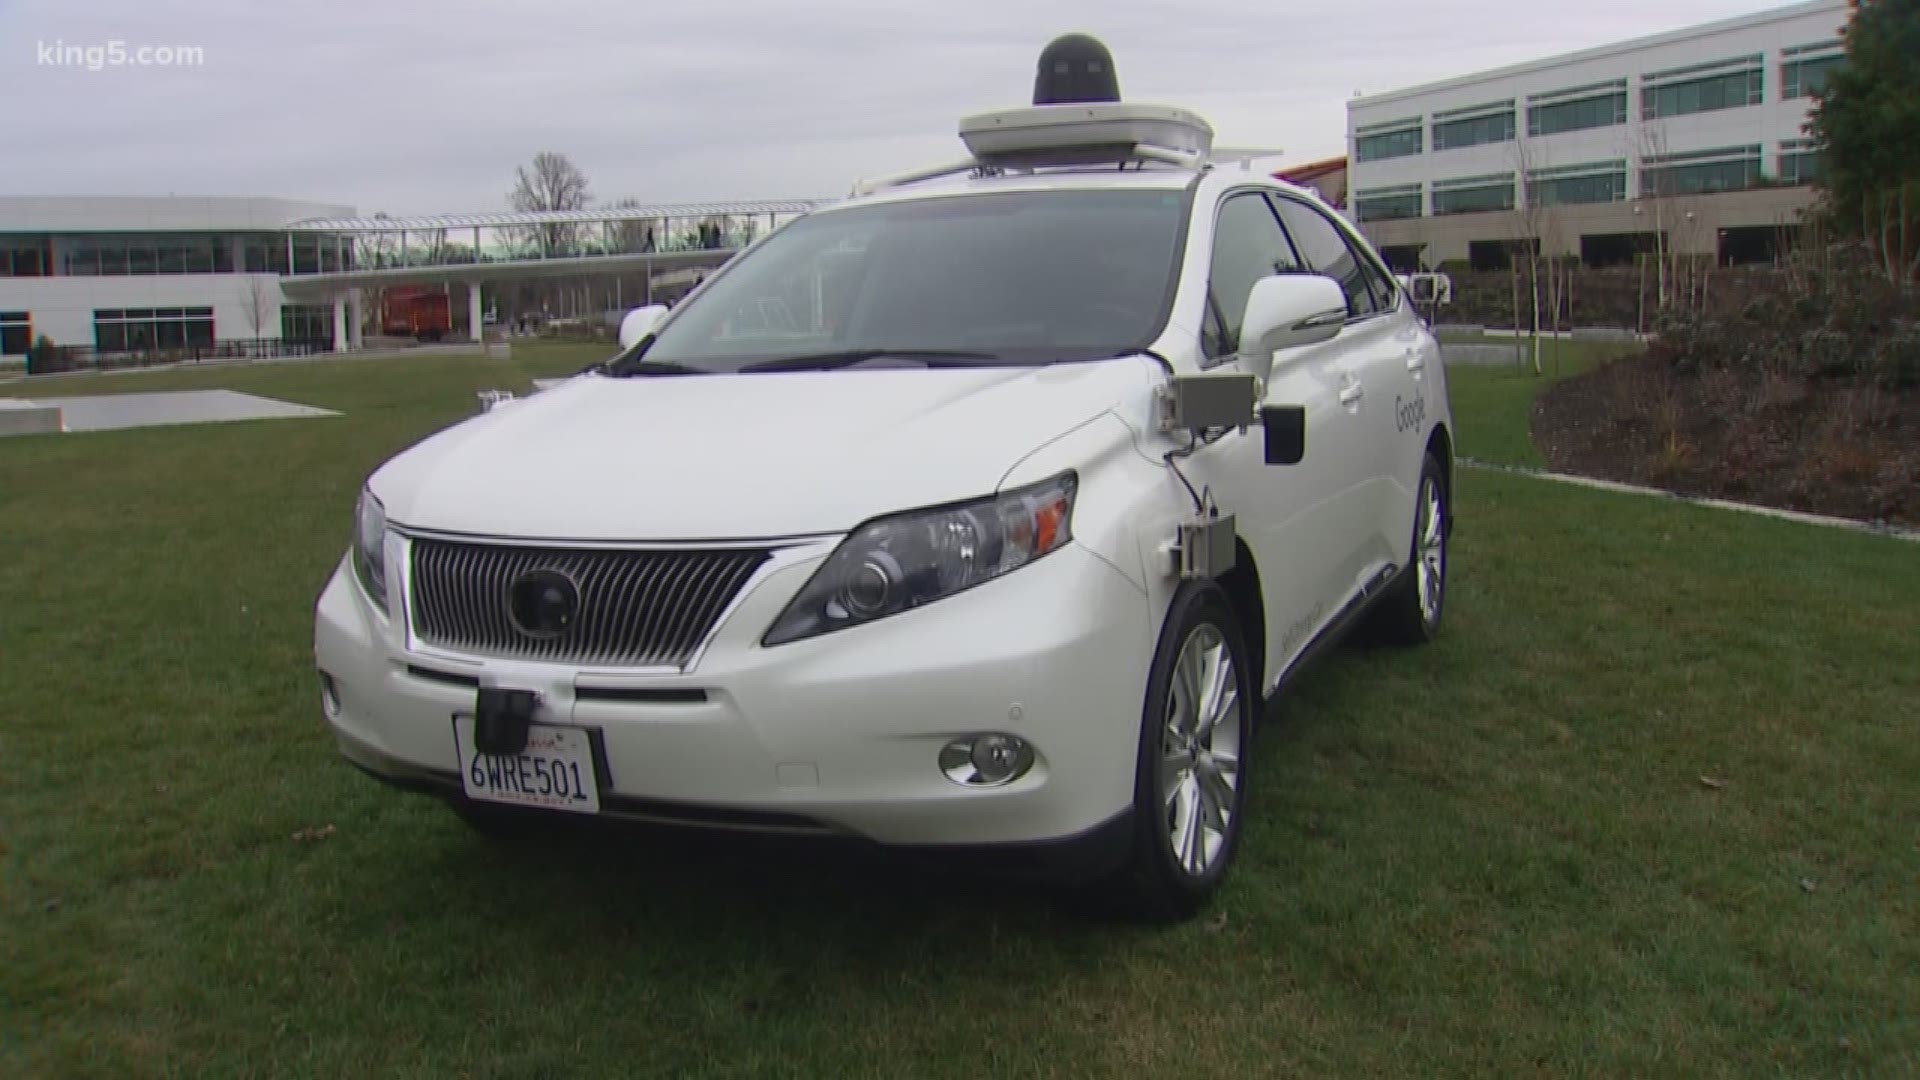 Self-driving cars may be years away on Washington roads, but transportation officials are reviewing rules and possible laws in November. KING 5's Drew Mikkelsen: